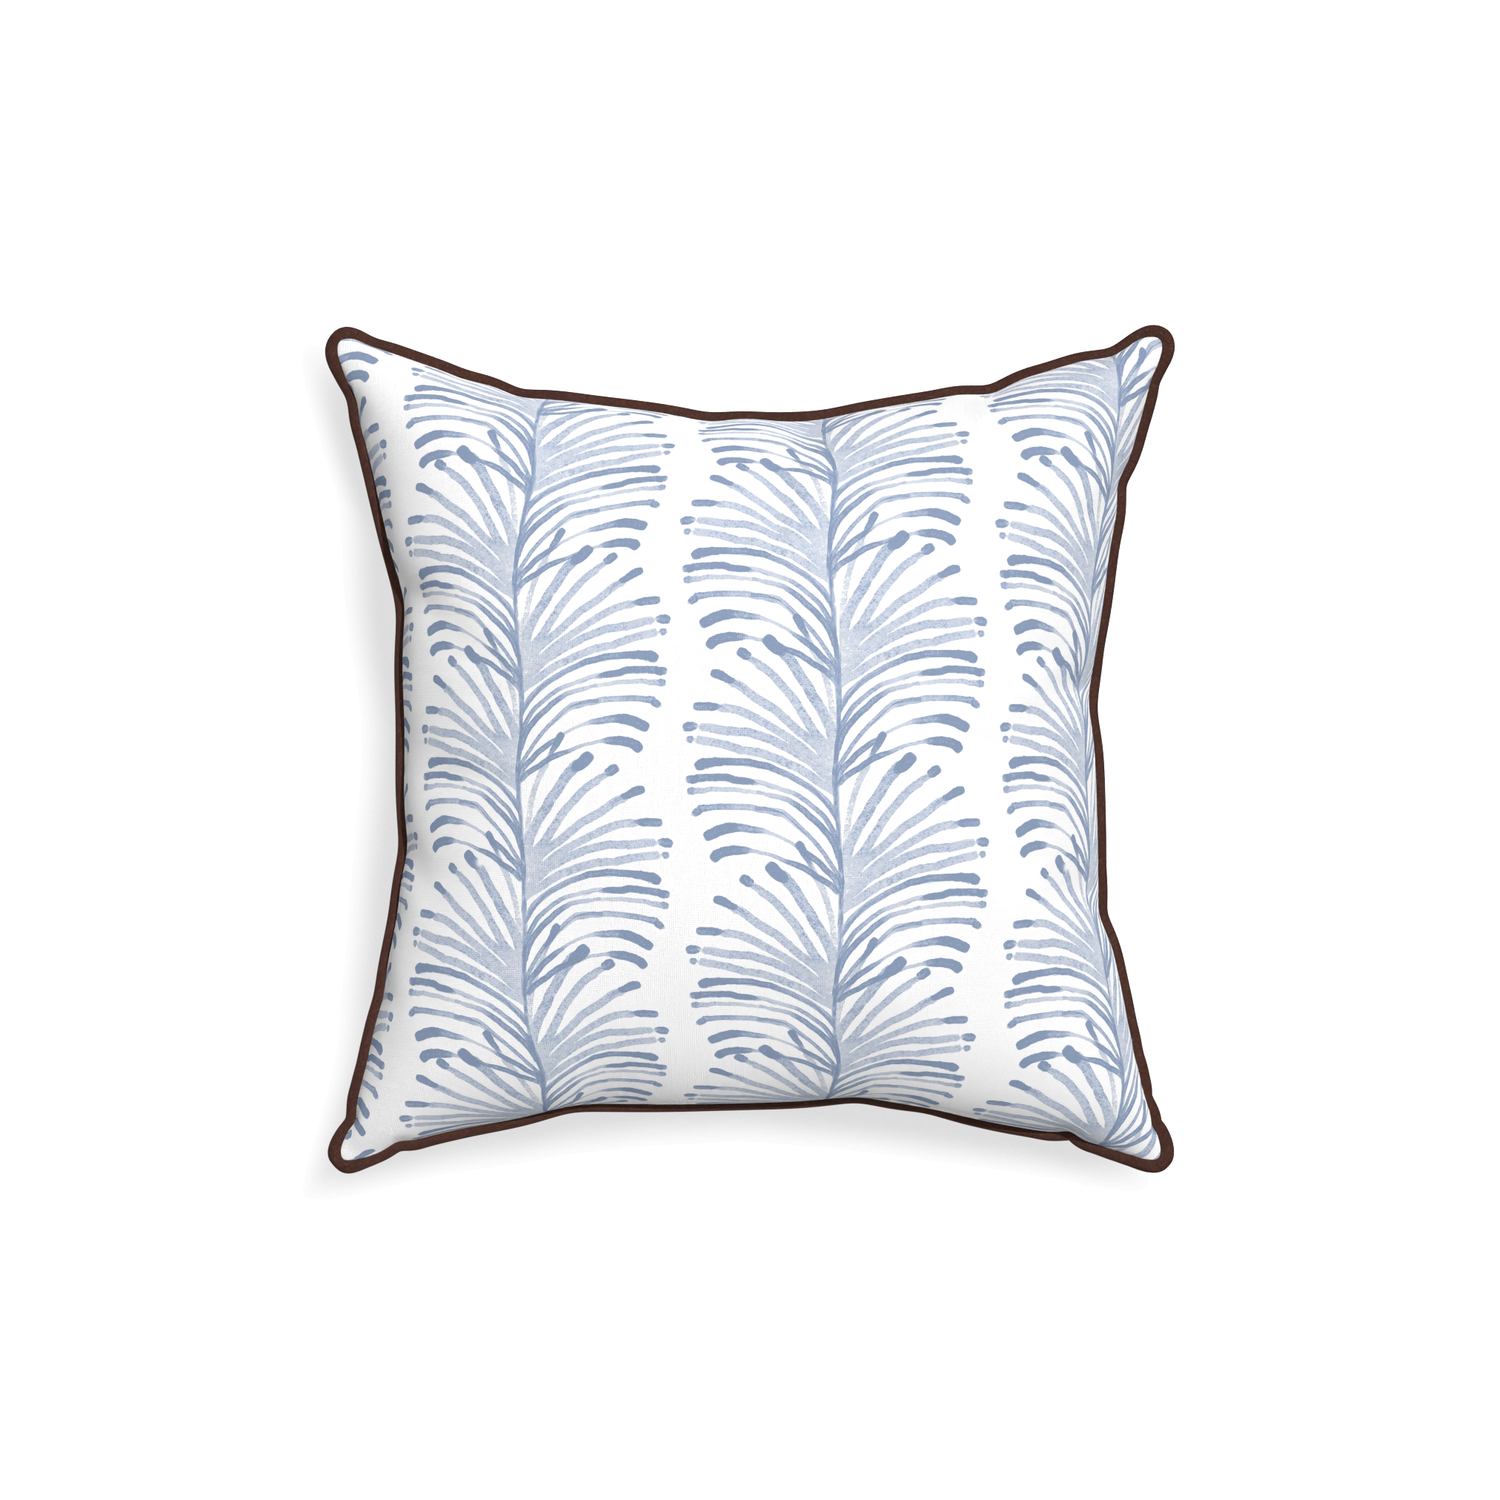 18-square emma sky custom pillow with w piping on white background